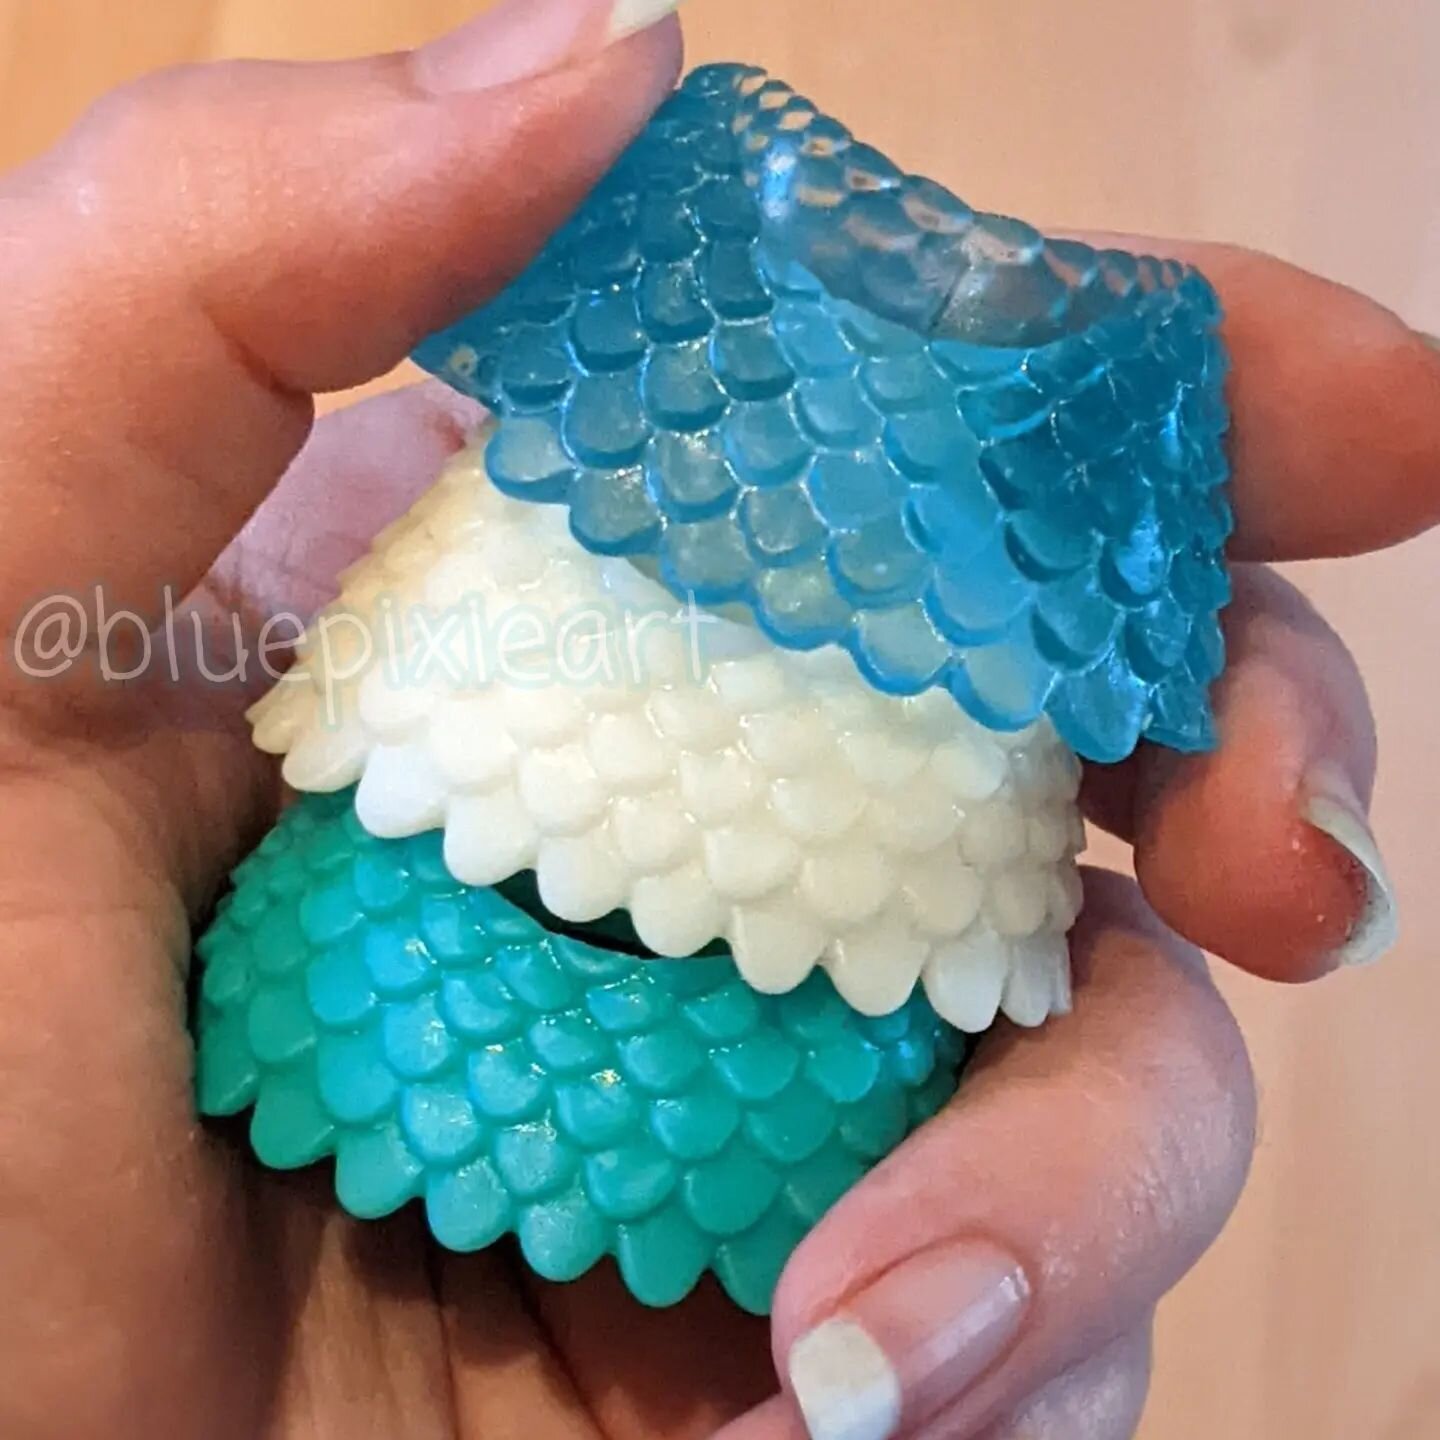 There's still 3 nixies left!

Here's the resin colours that Nixie's tail comes in. Clear blue, white and mint green.

There's one clear blue and both mint greens left so make sure to get your hands on one before they go!

#nixiemermaid #mermay2022 #m